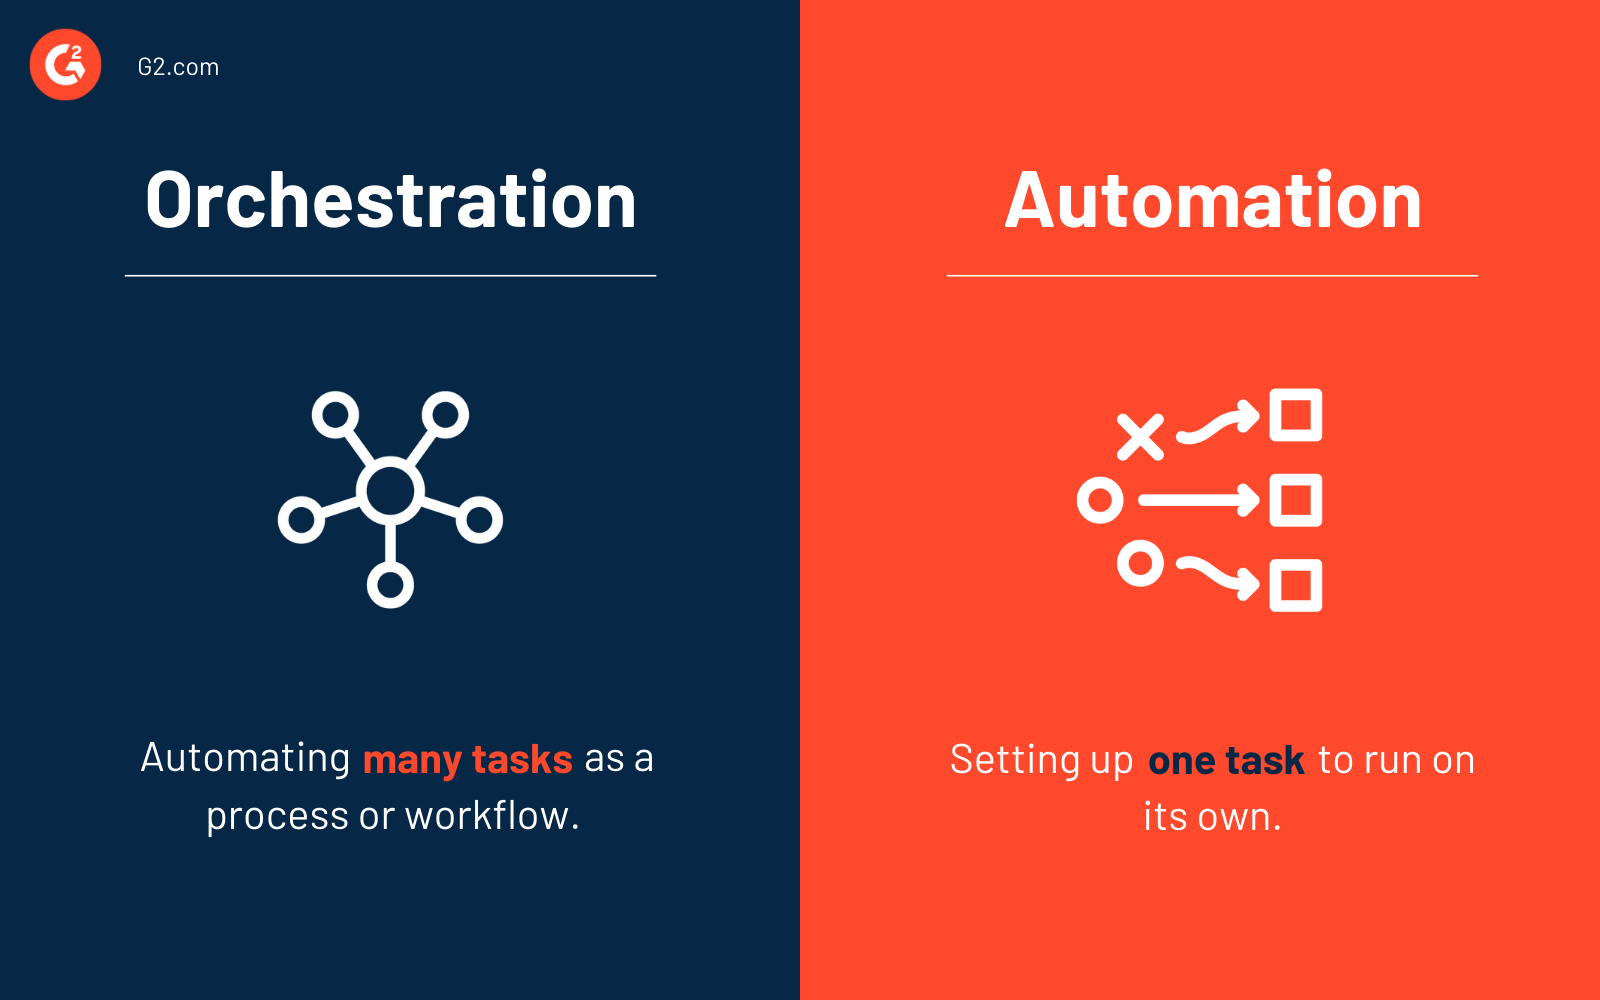 Network%20automation%20vs.%20network%20orchestration%20(3)